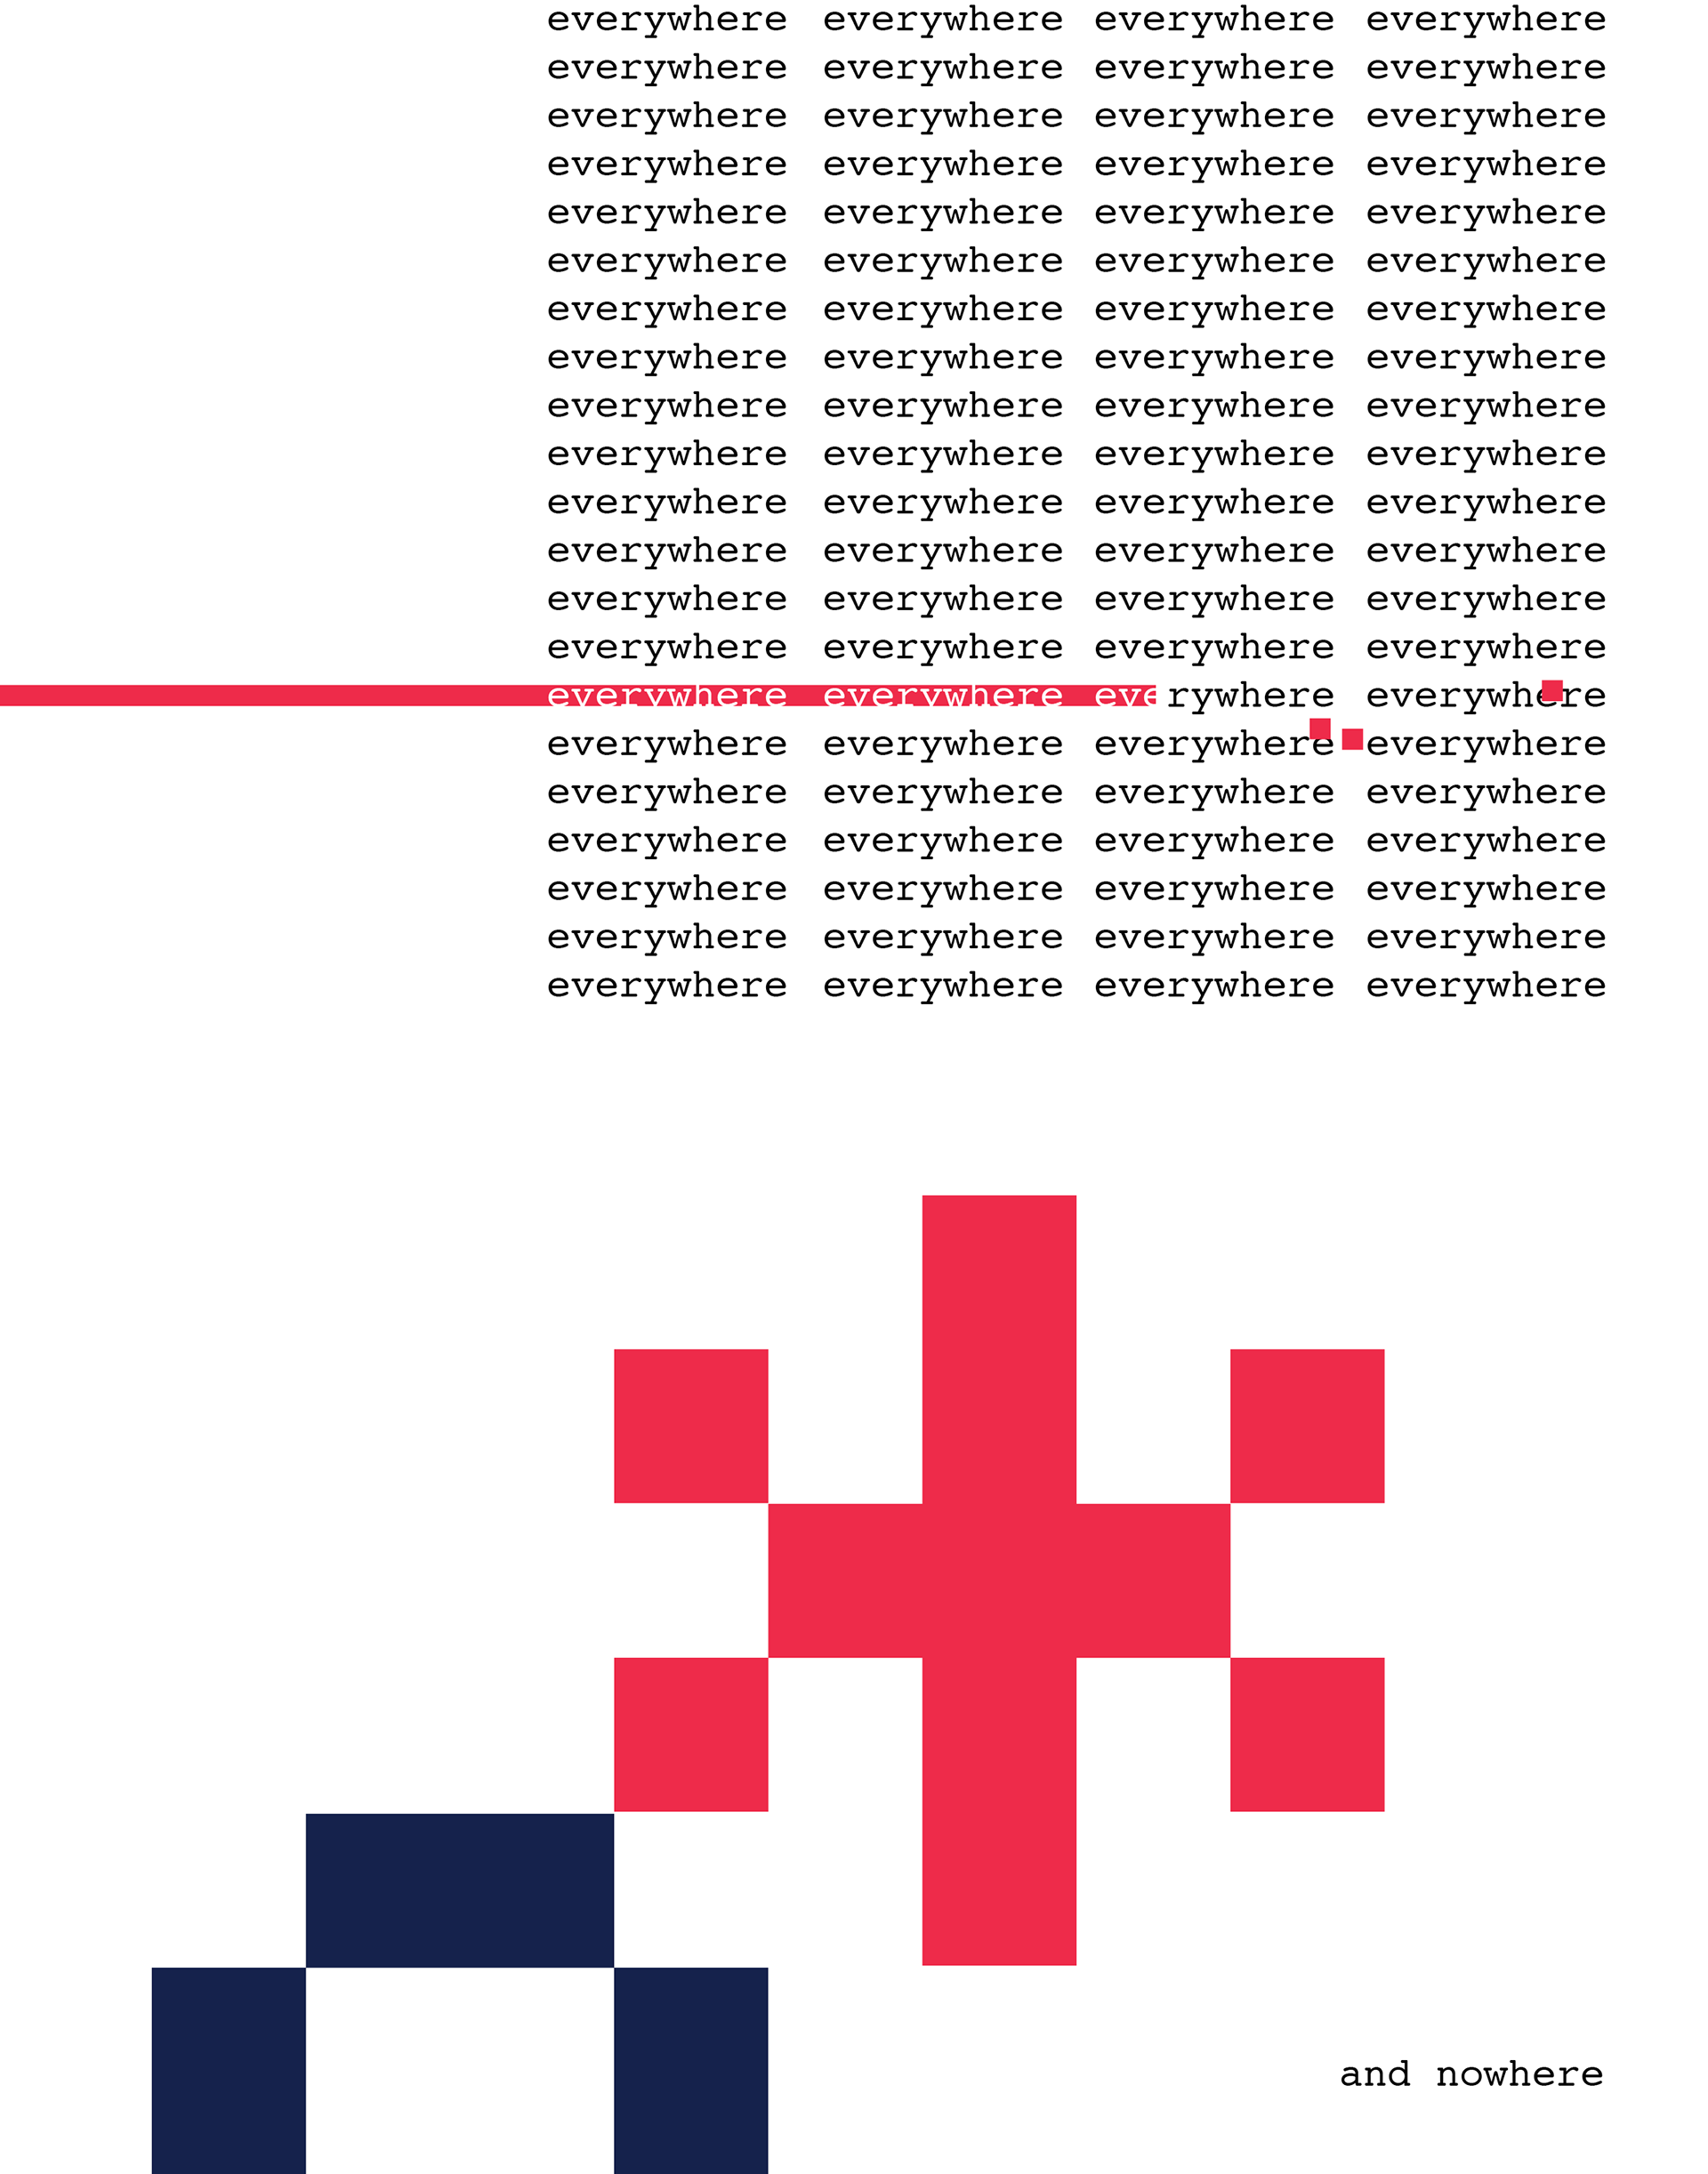 Page with columns of text and large, pixelated keyboard characters. The columns of text repeat the word 'everywhere', with a red line underhneath the columns that breaks off into red pixels. At the bottom of the page is the text, 'and nowhere'